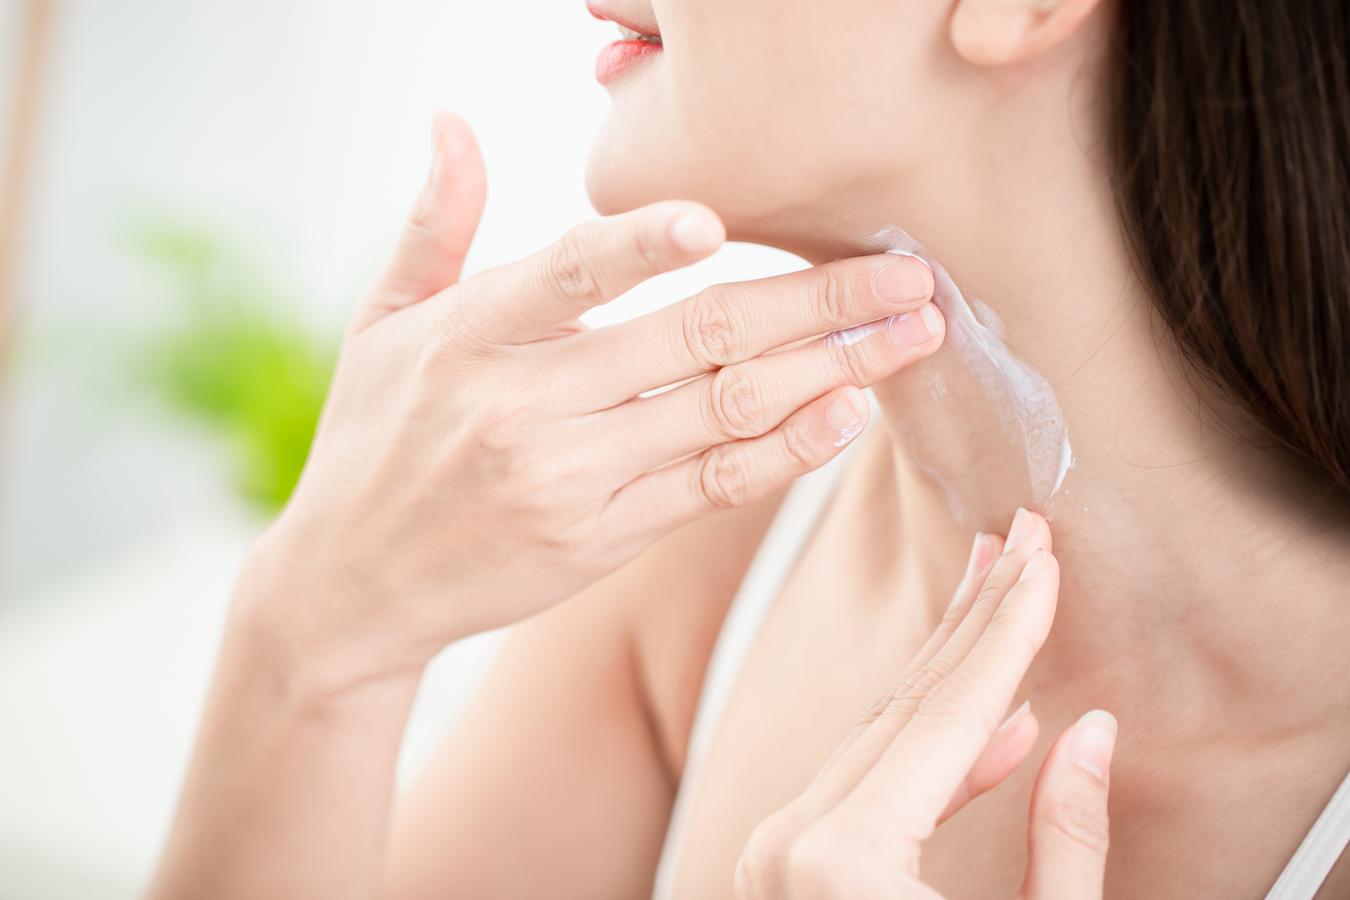 Wash your face with warm water and gently pat dry then add hydration with skin care products